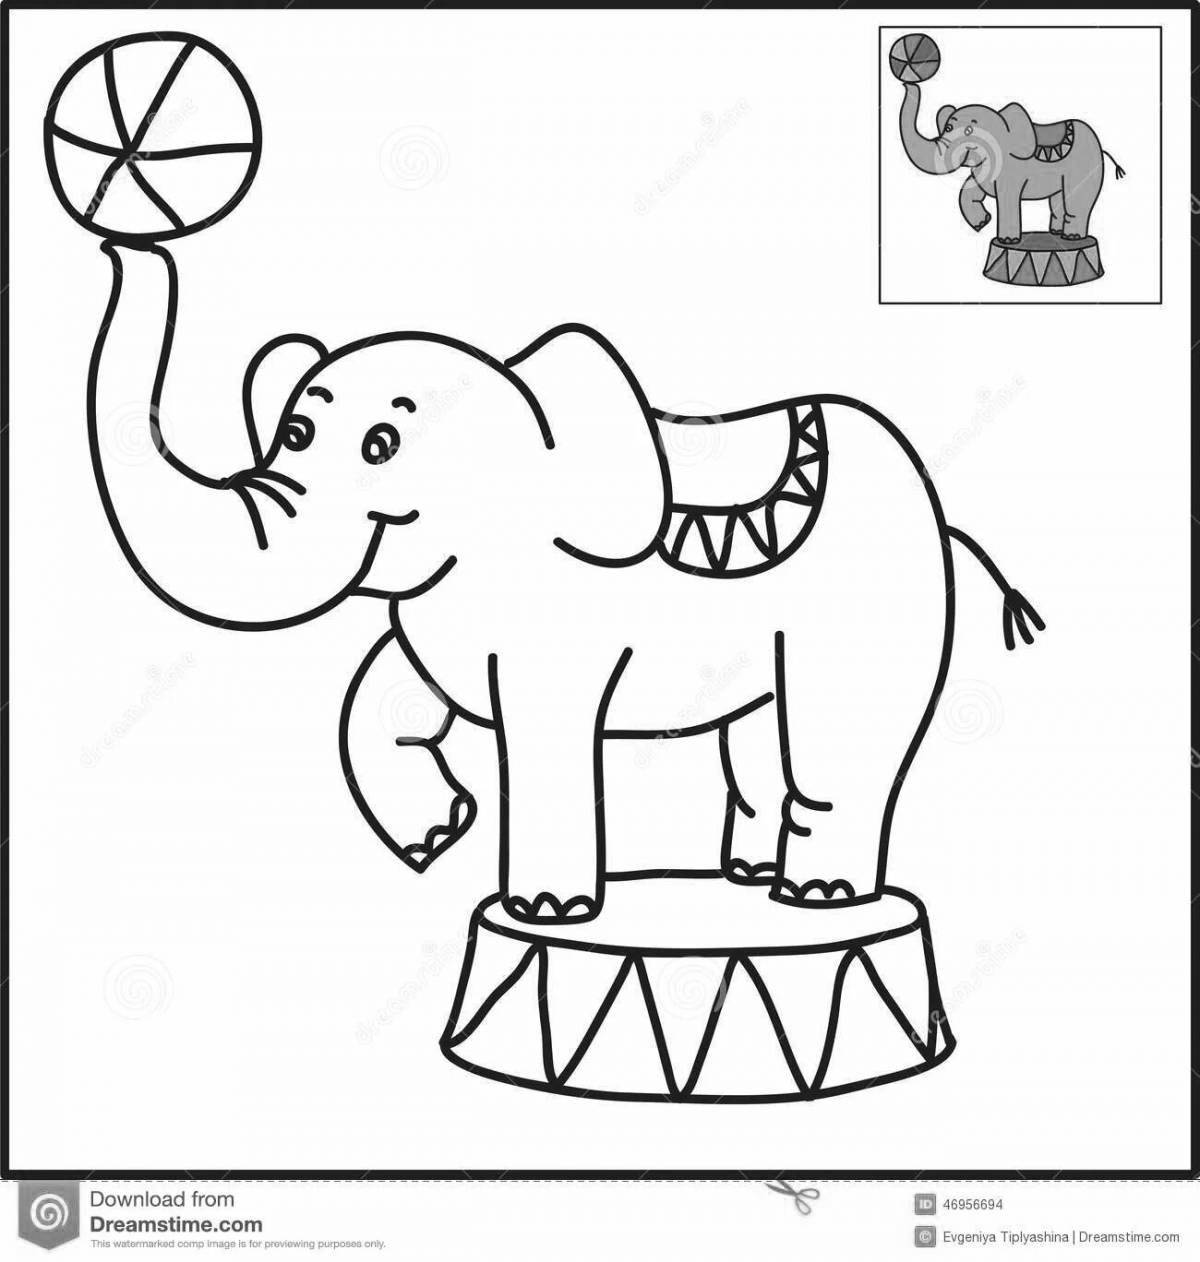 Coloring king circus elephant